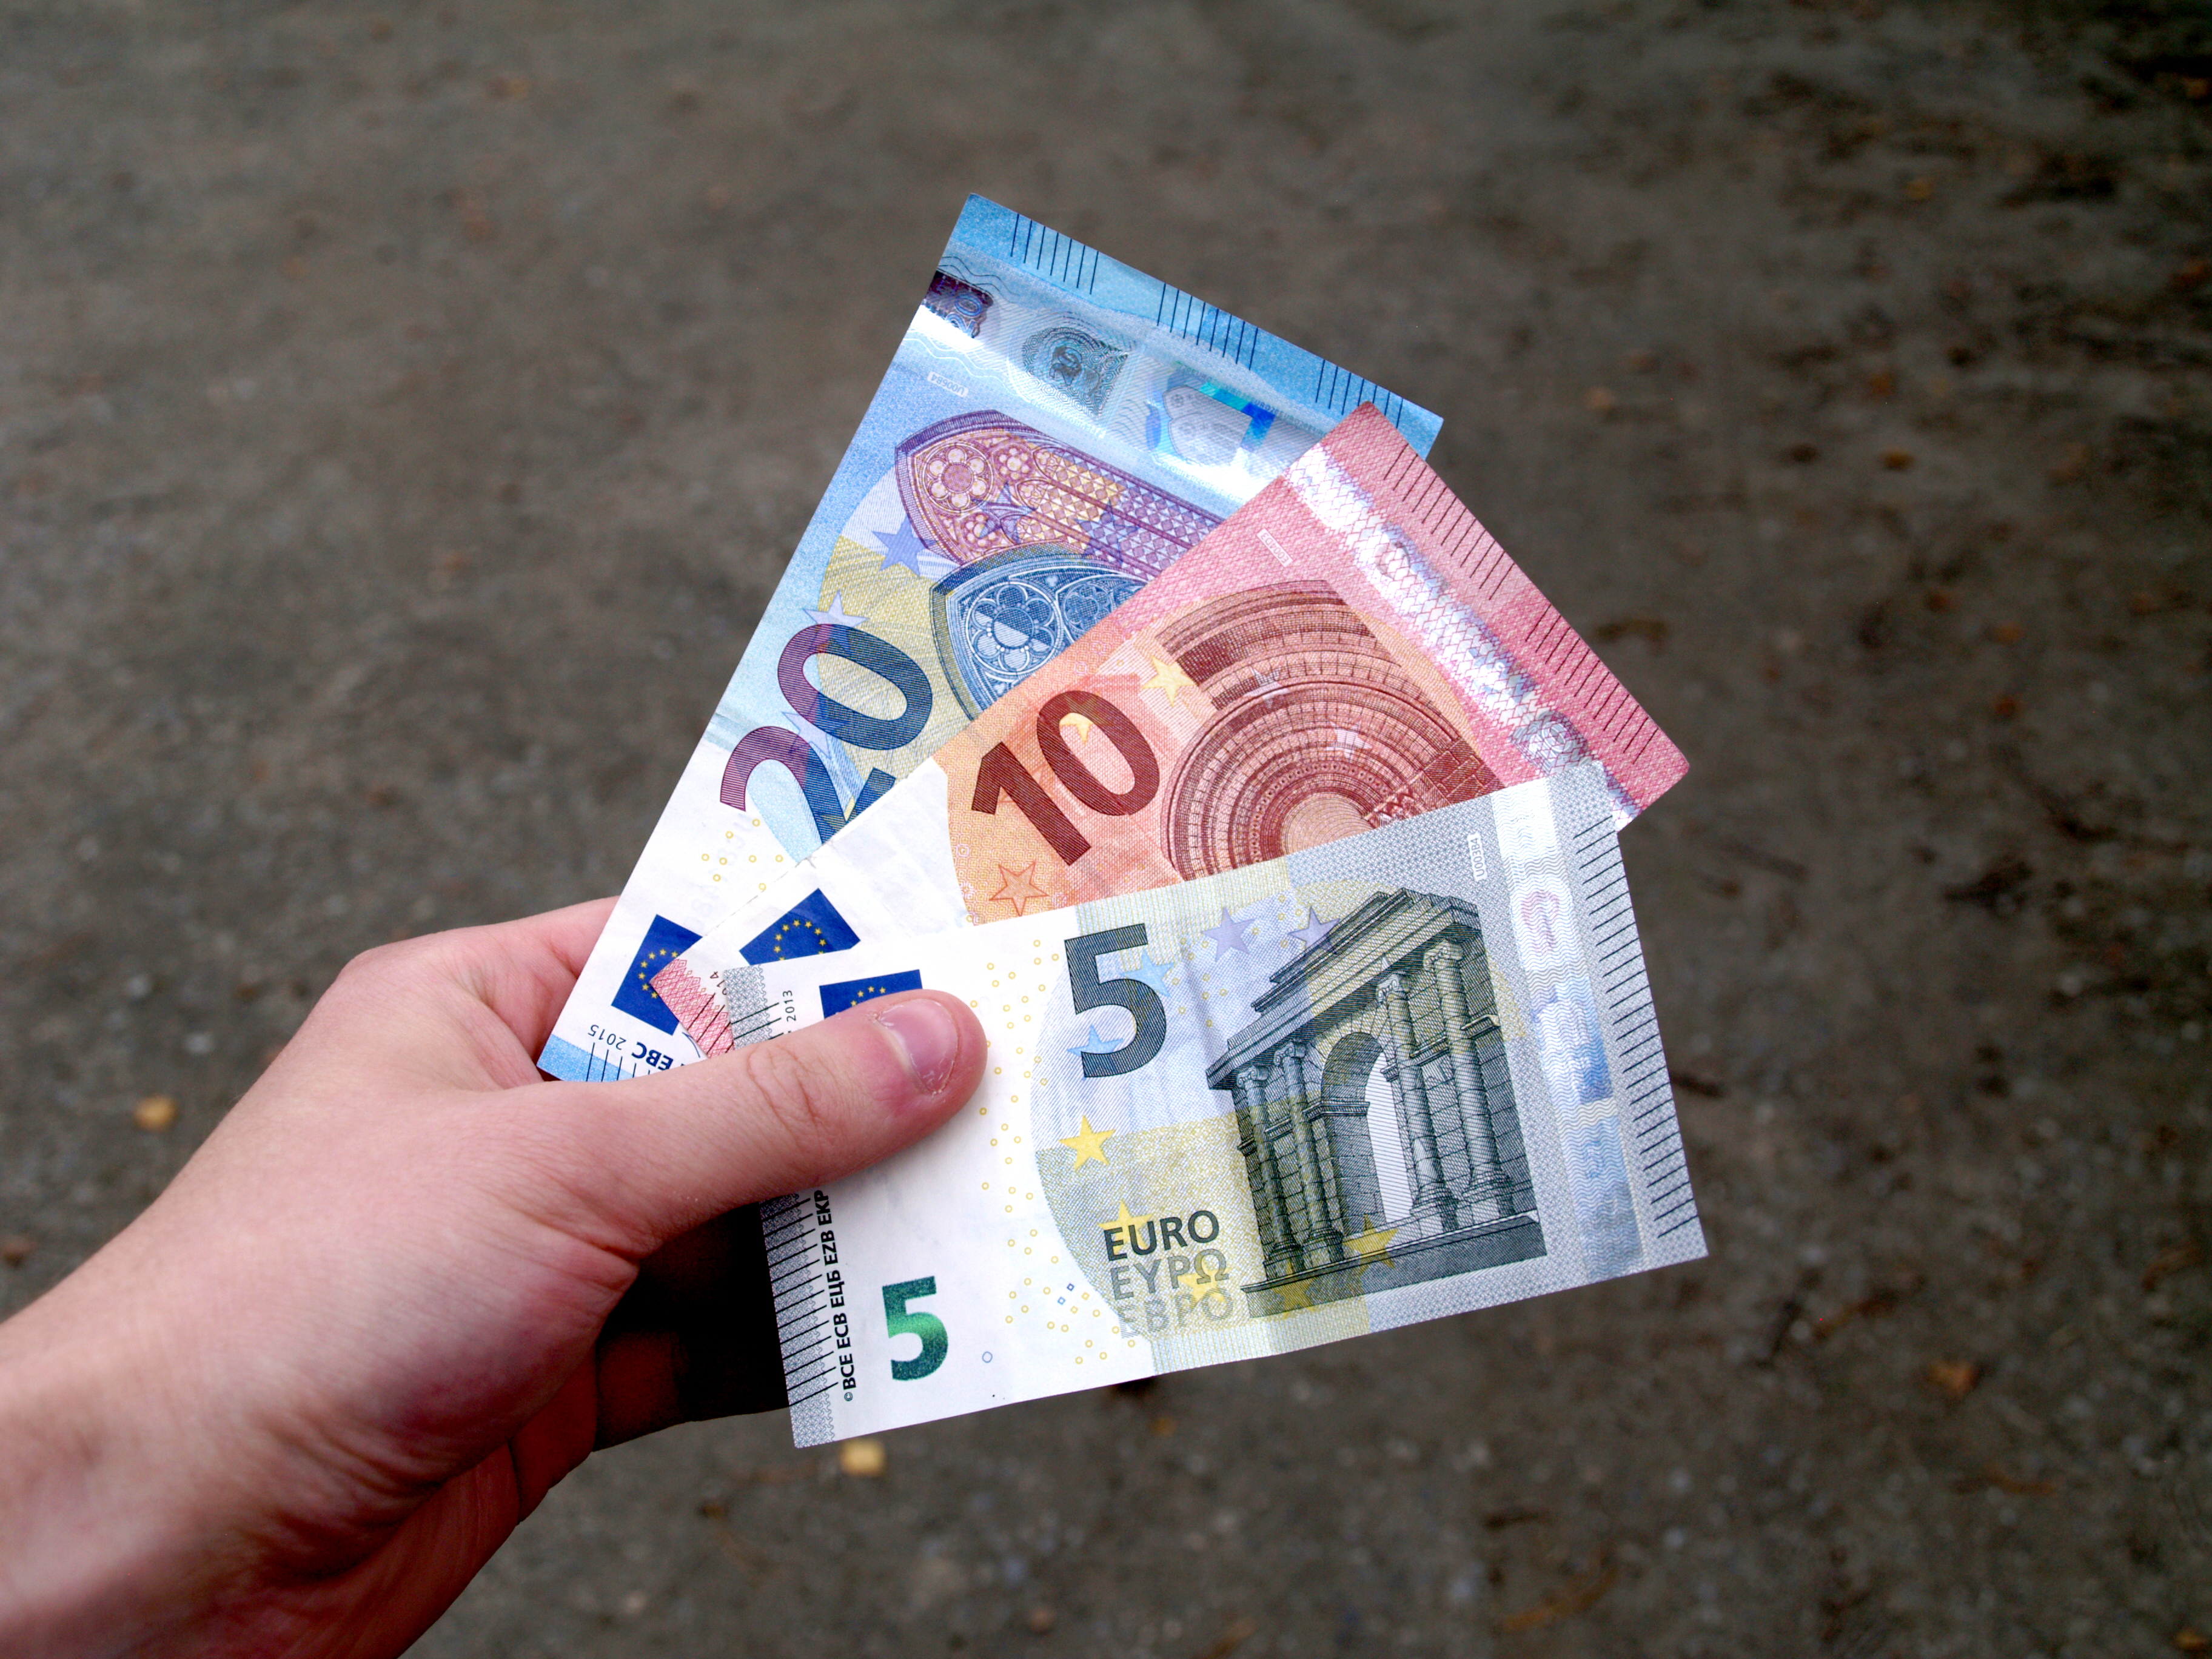 File Second Series 5 10 Euro Banknotes In Hand Jpg Wikimedia Commons